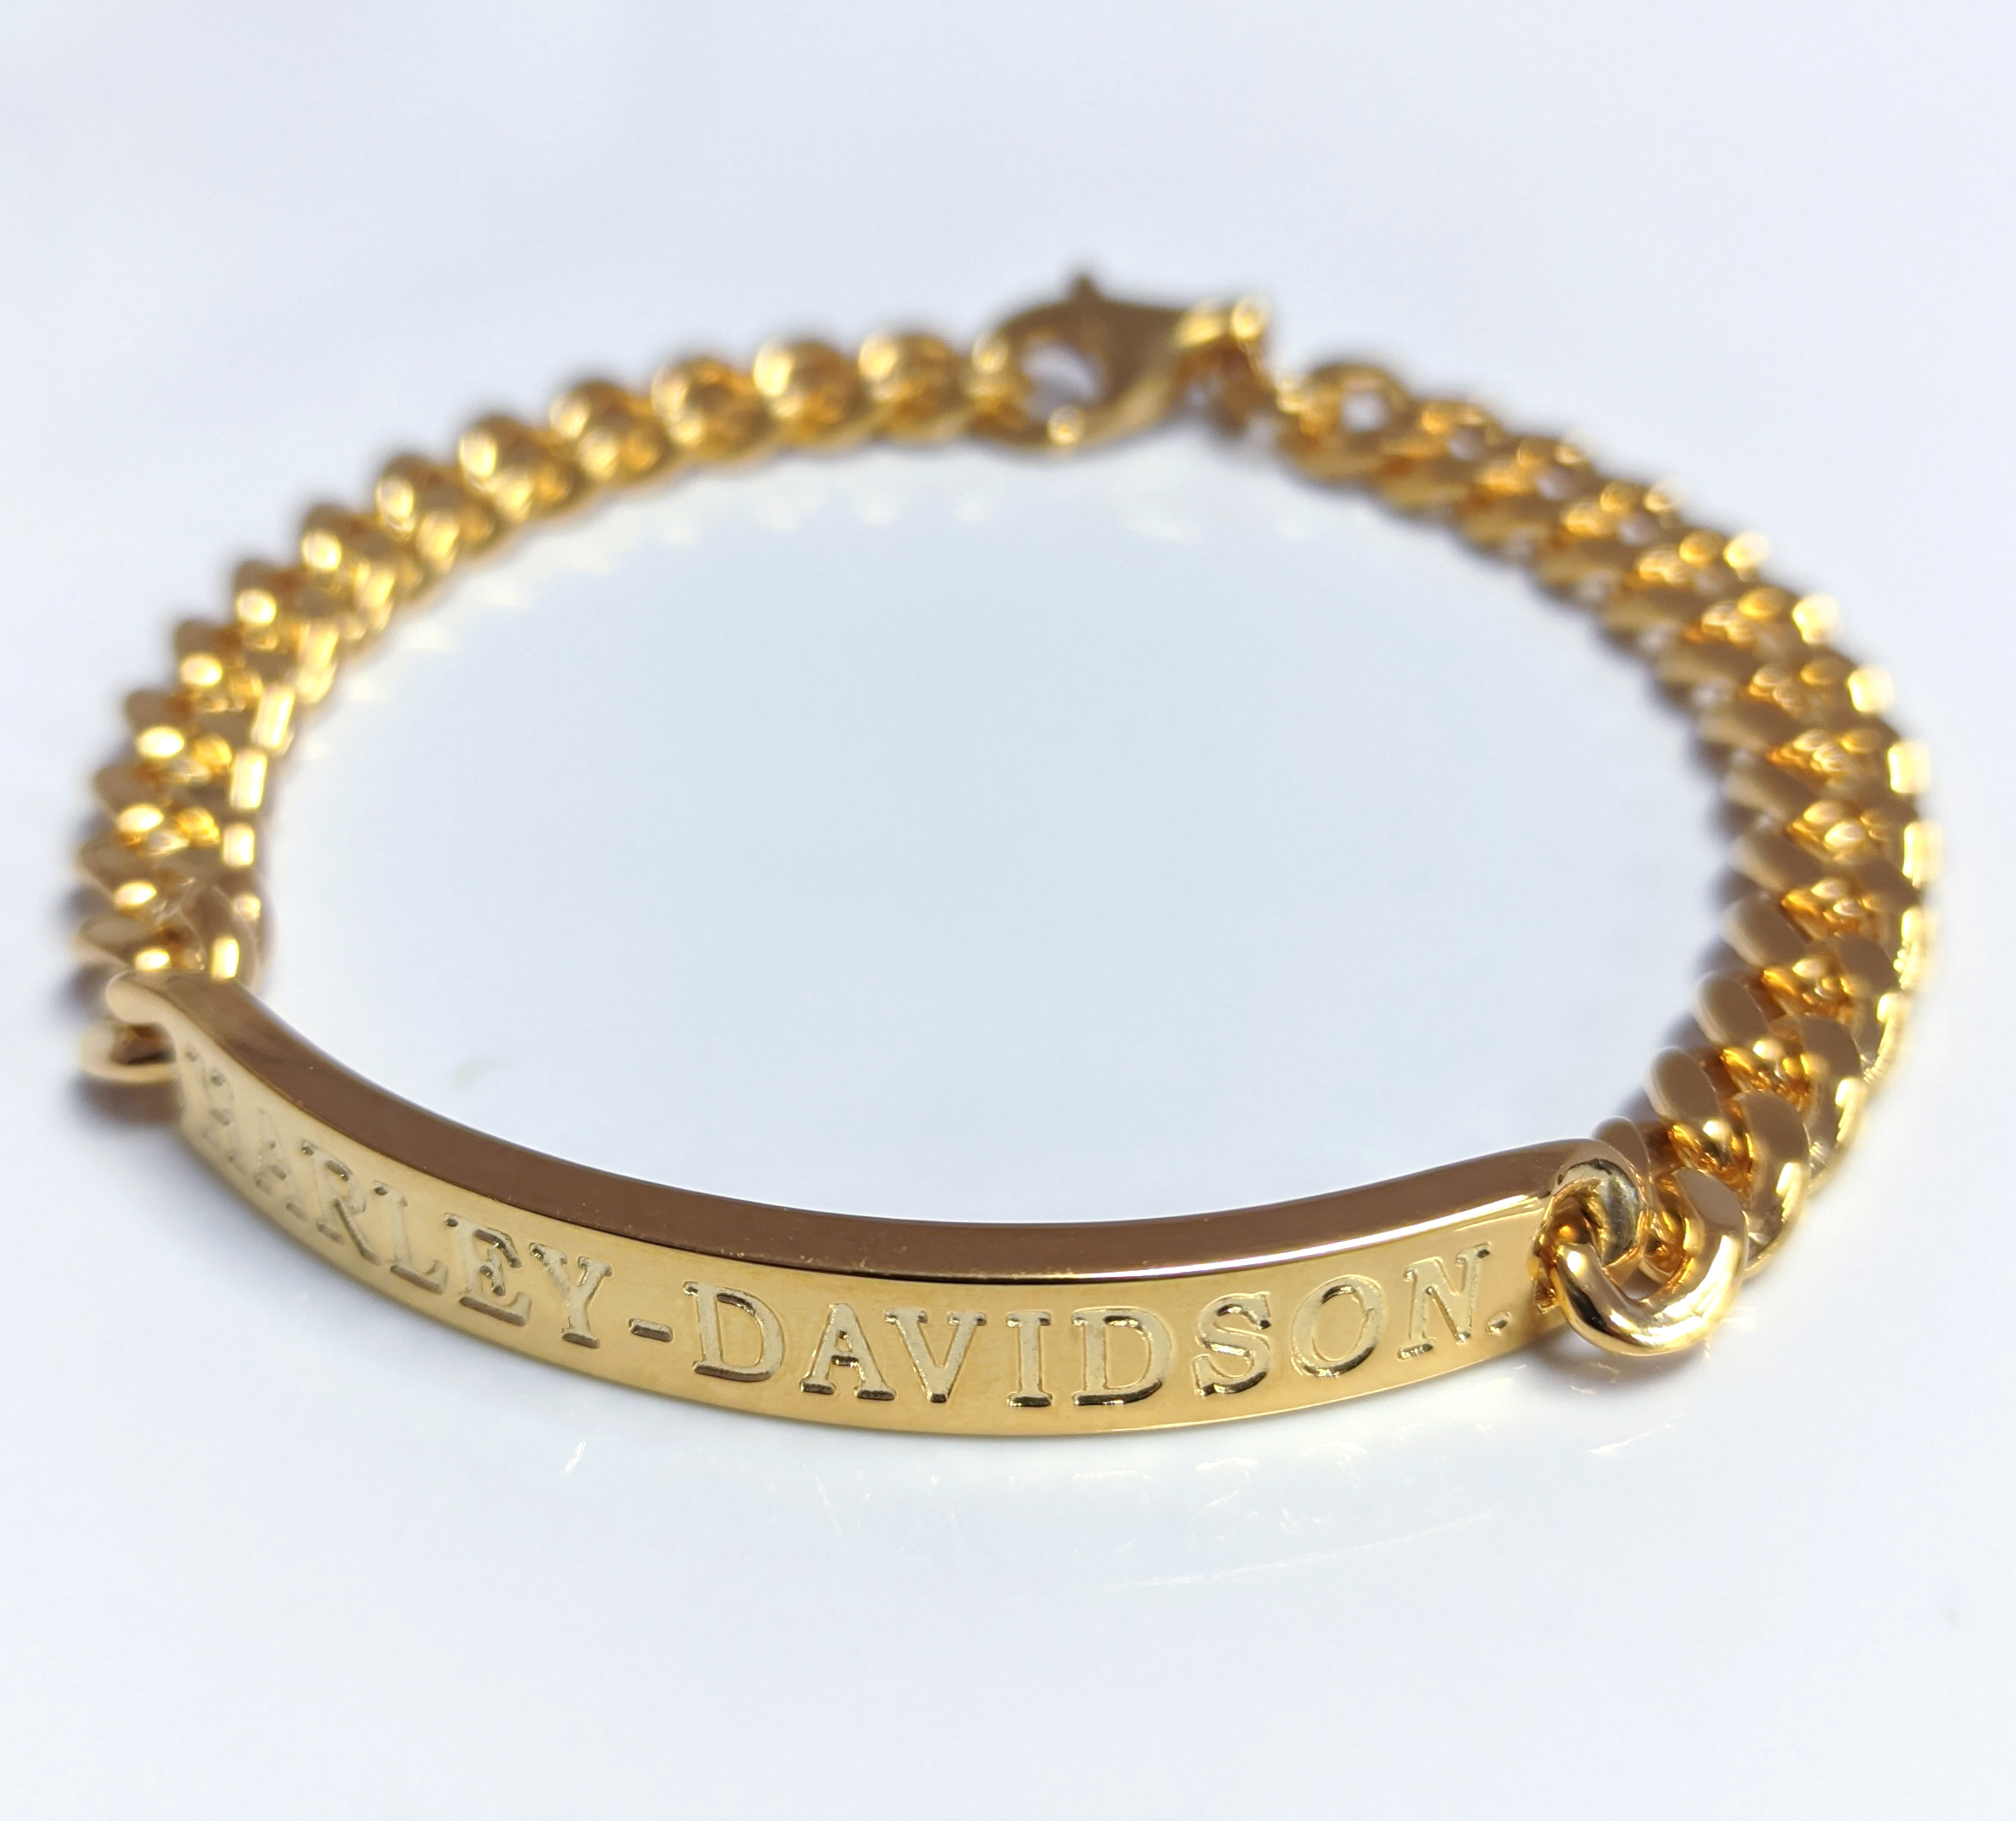 Made in Italy Men's Curb Chain ID Bracelet in 14K Gold - 8.5